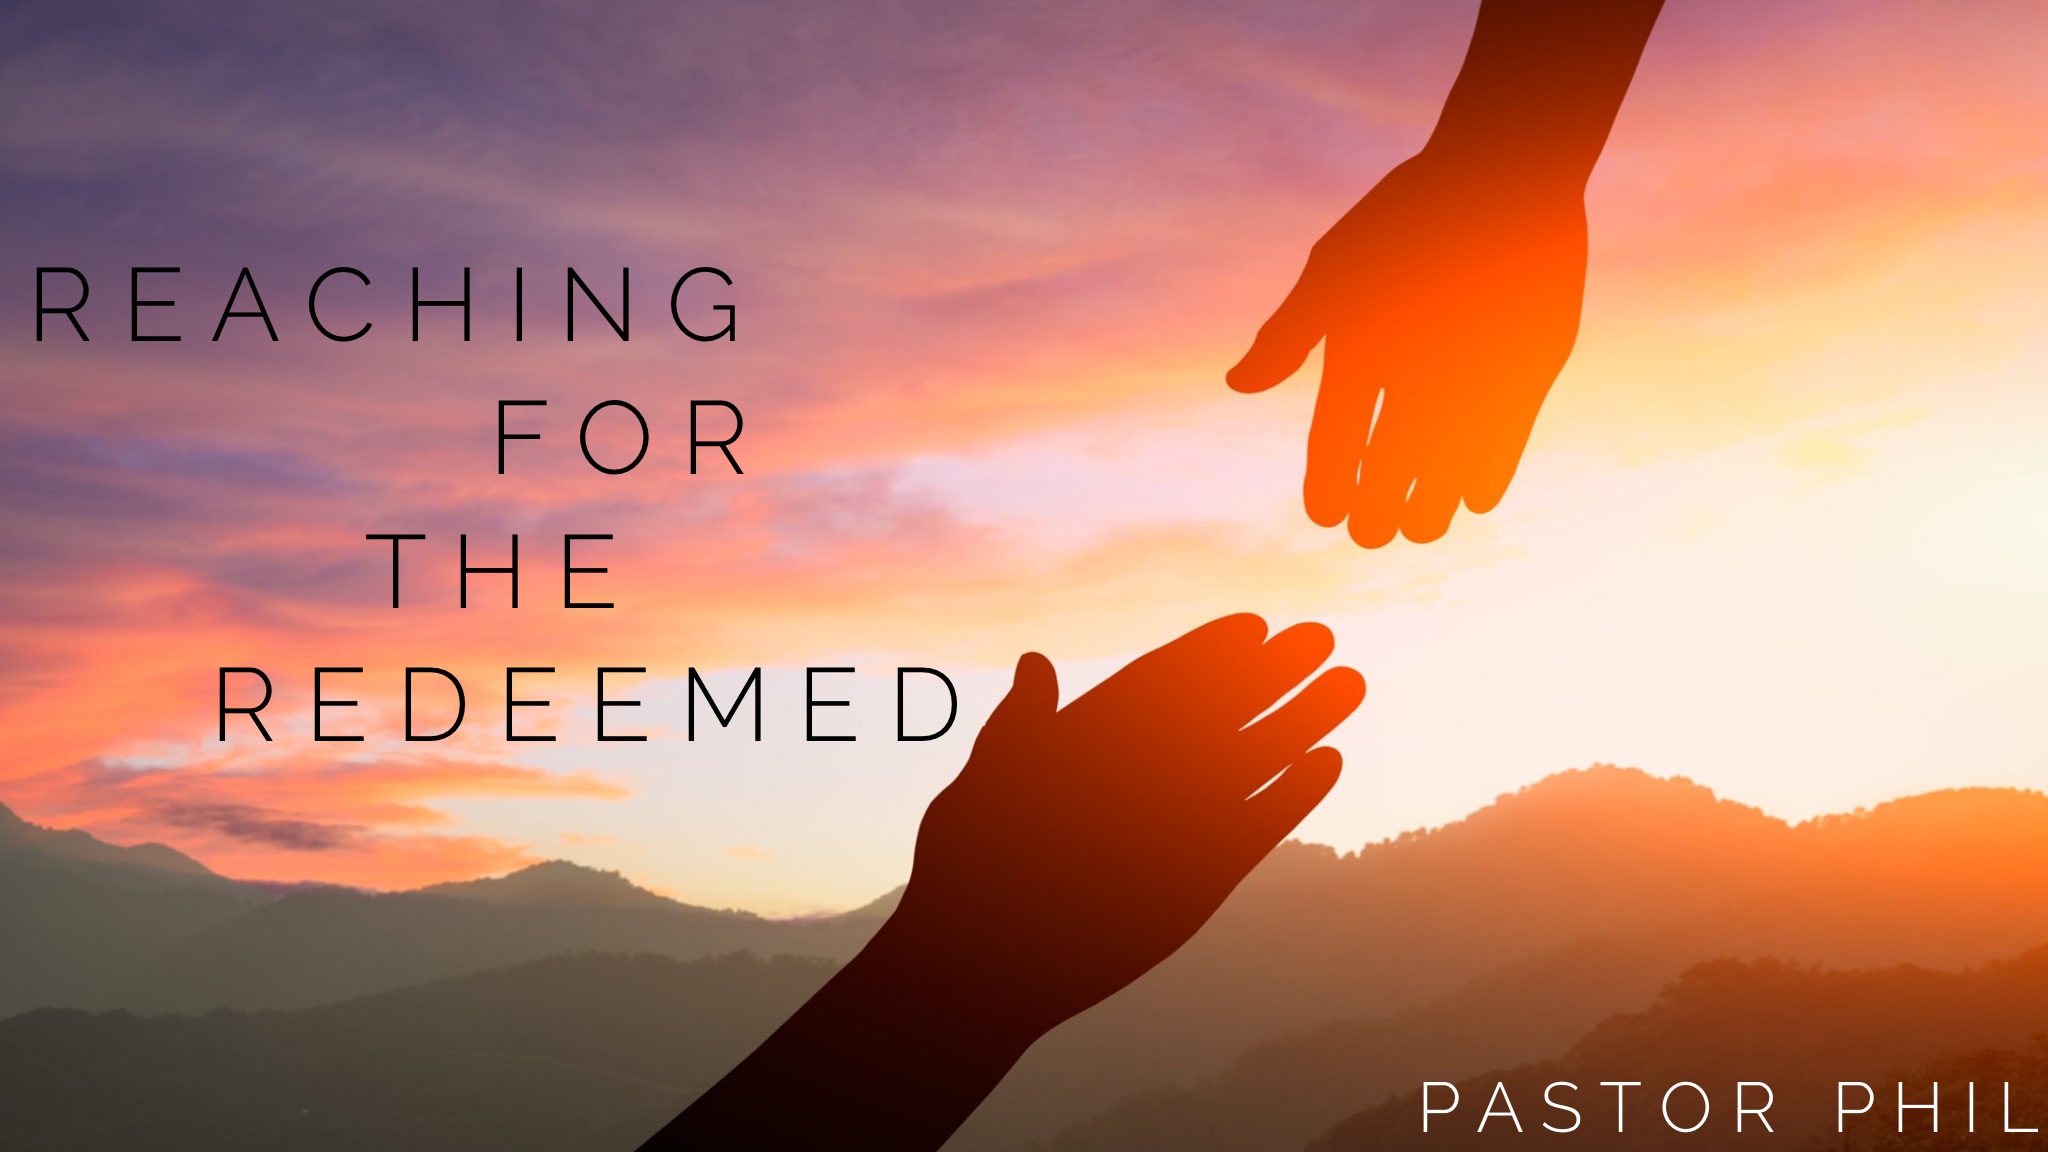 Reaching for the Redeemed